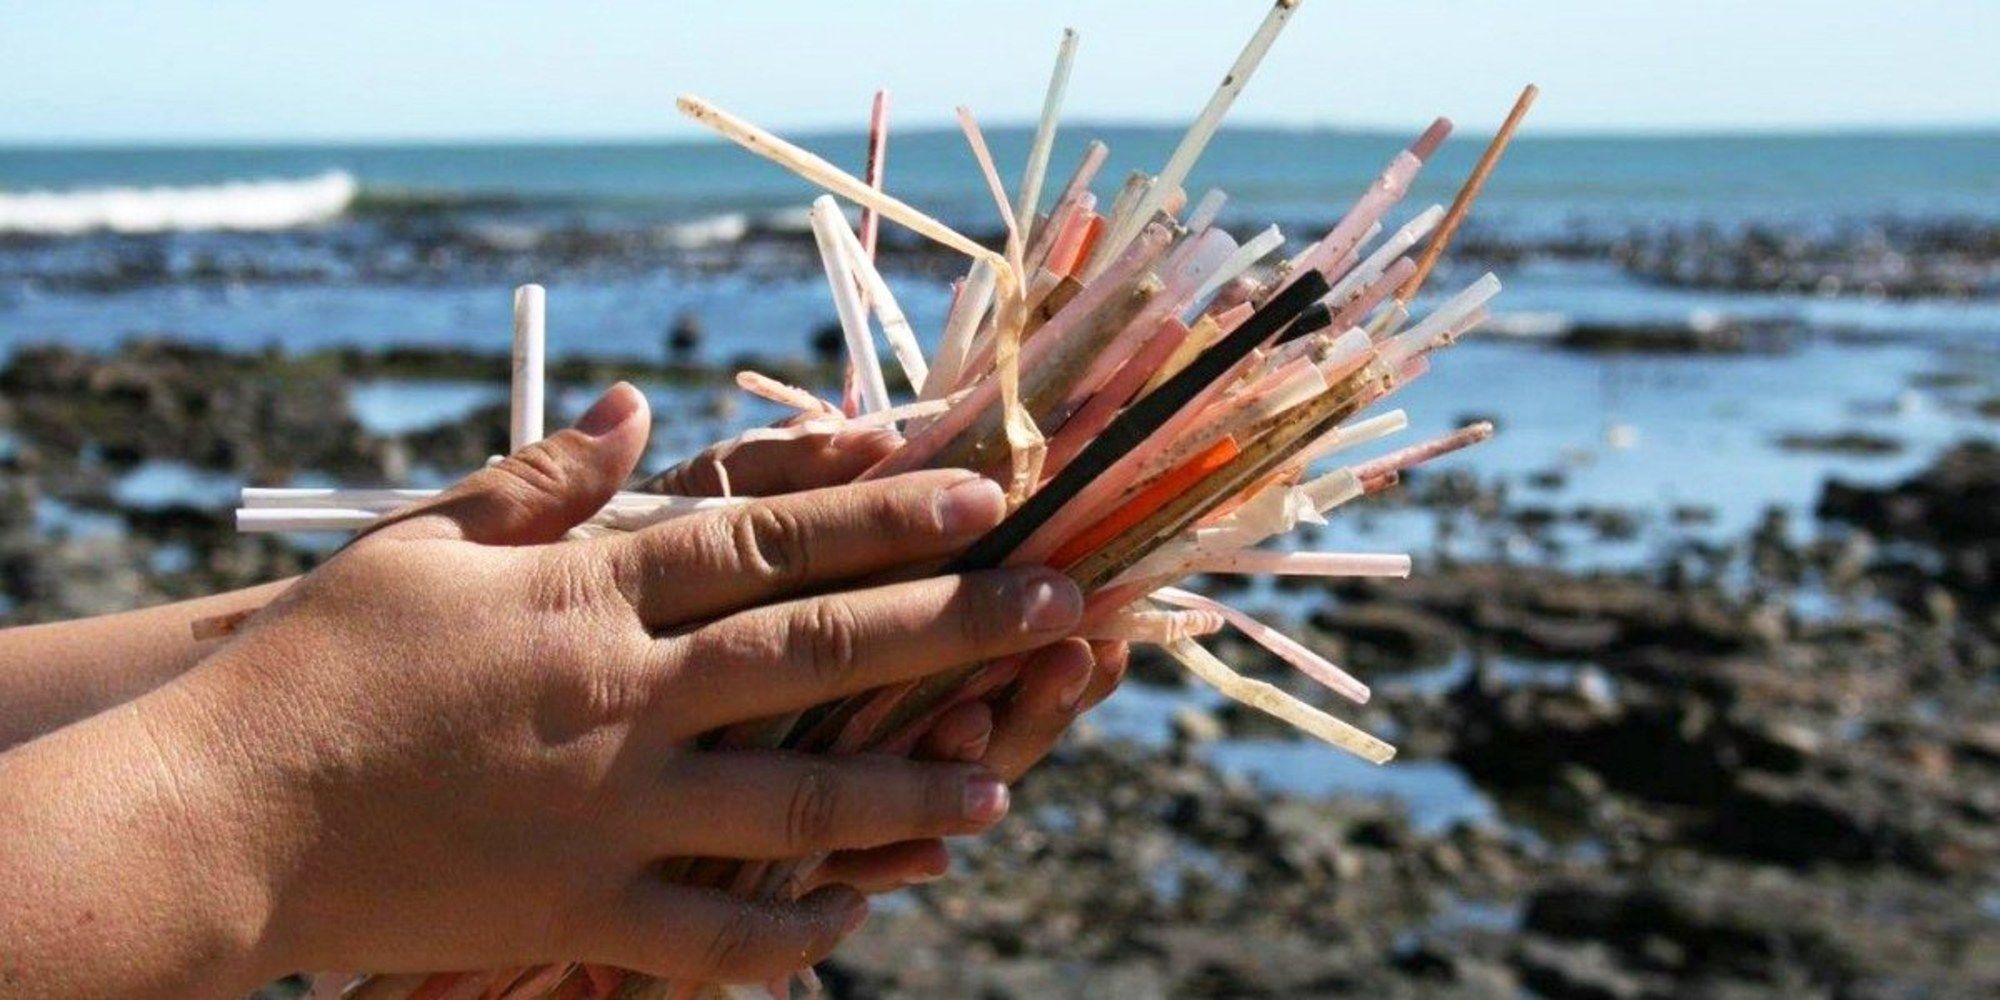 In the USA roughly 500 million plastic straws are used every day